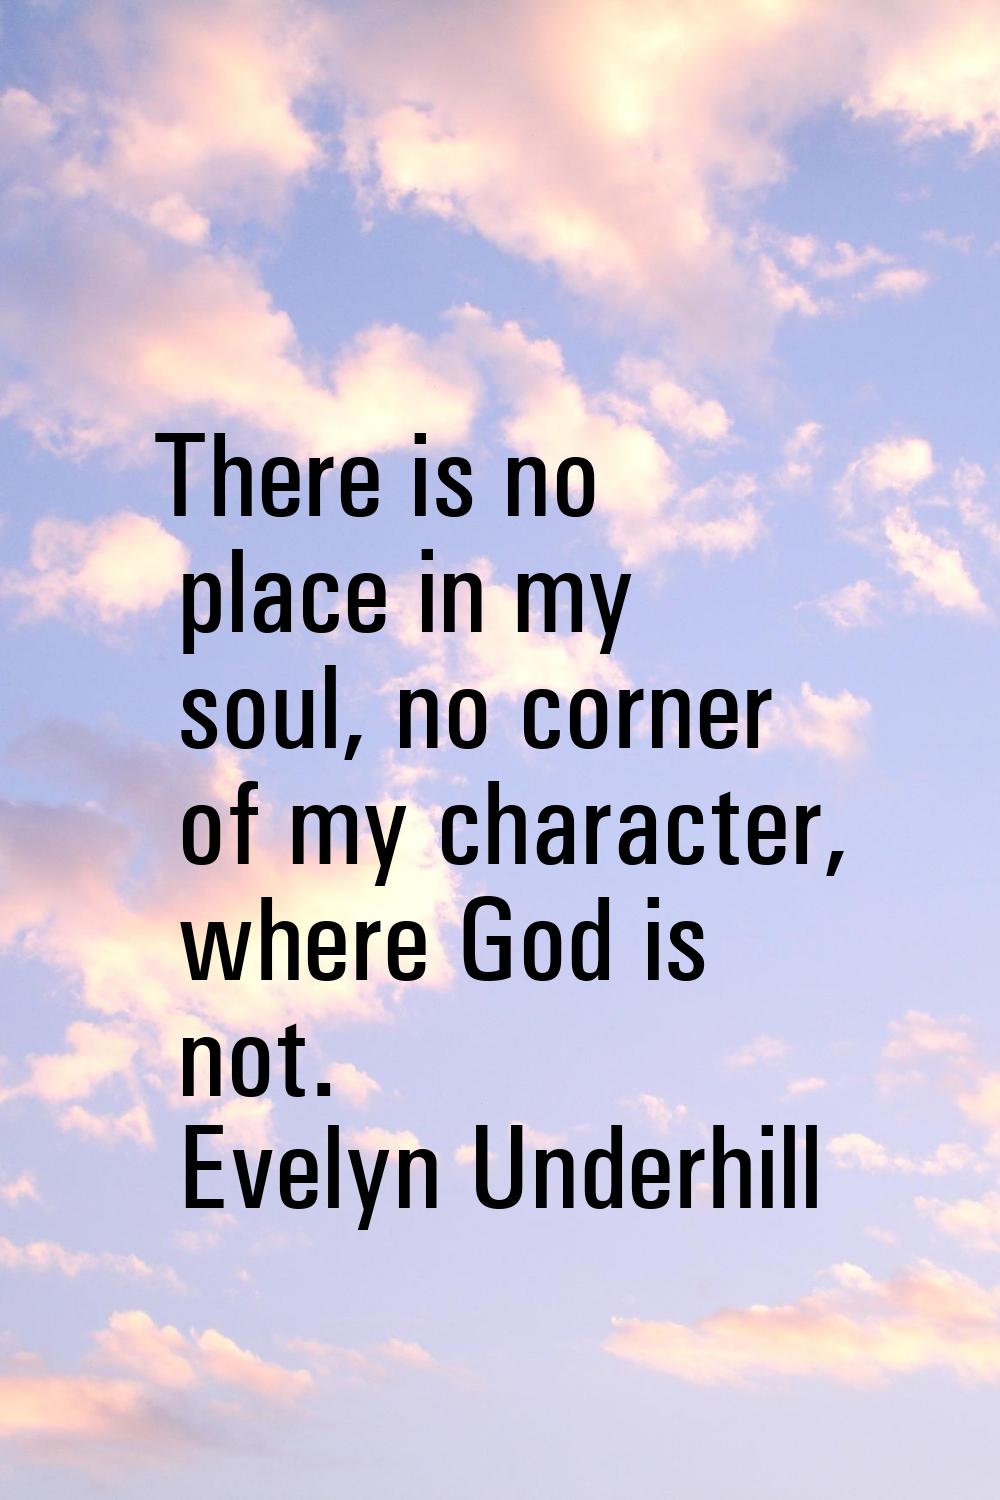 There is no place in my soul, no corner of my character, where God is not.